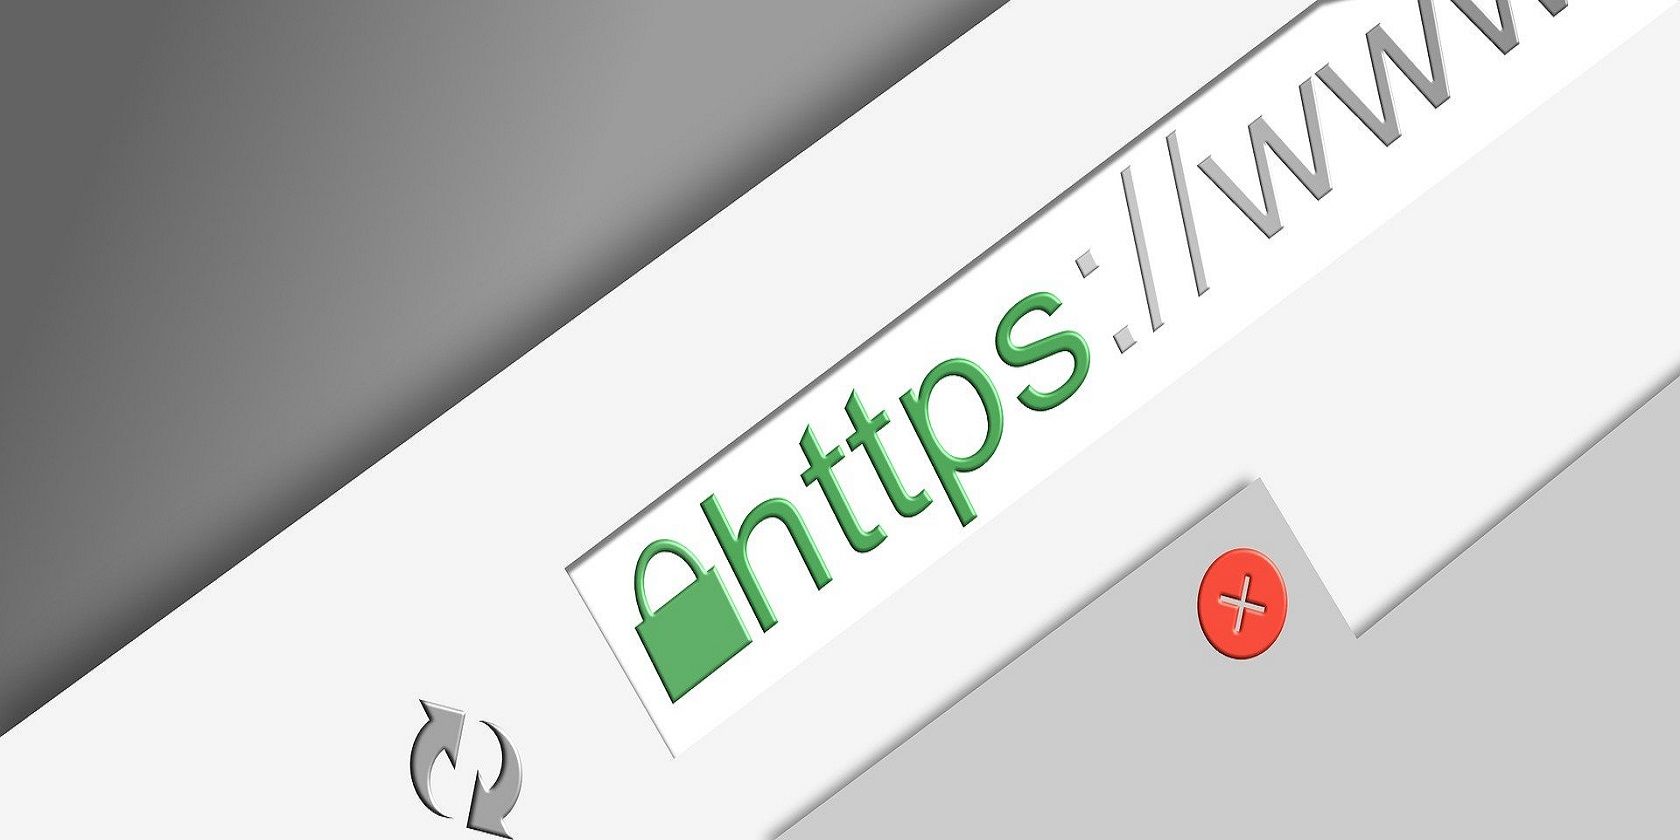 HTTPS in the browser bar. 